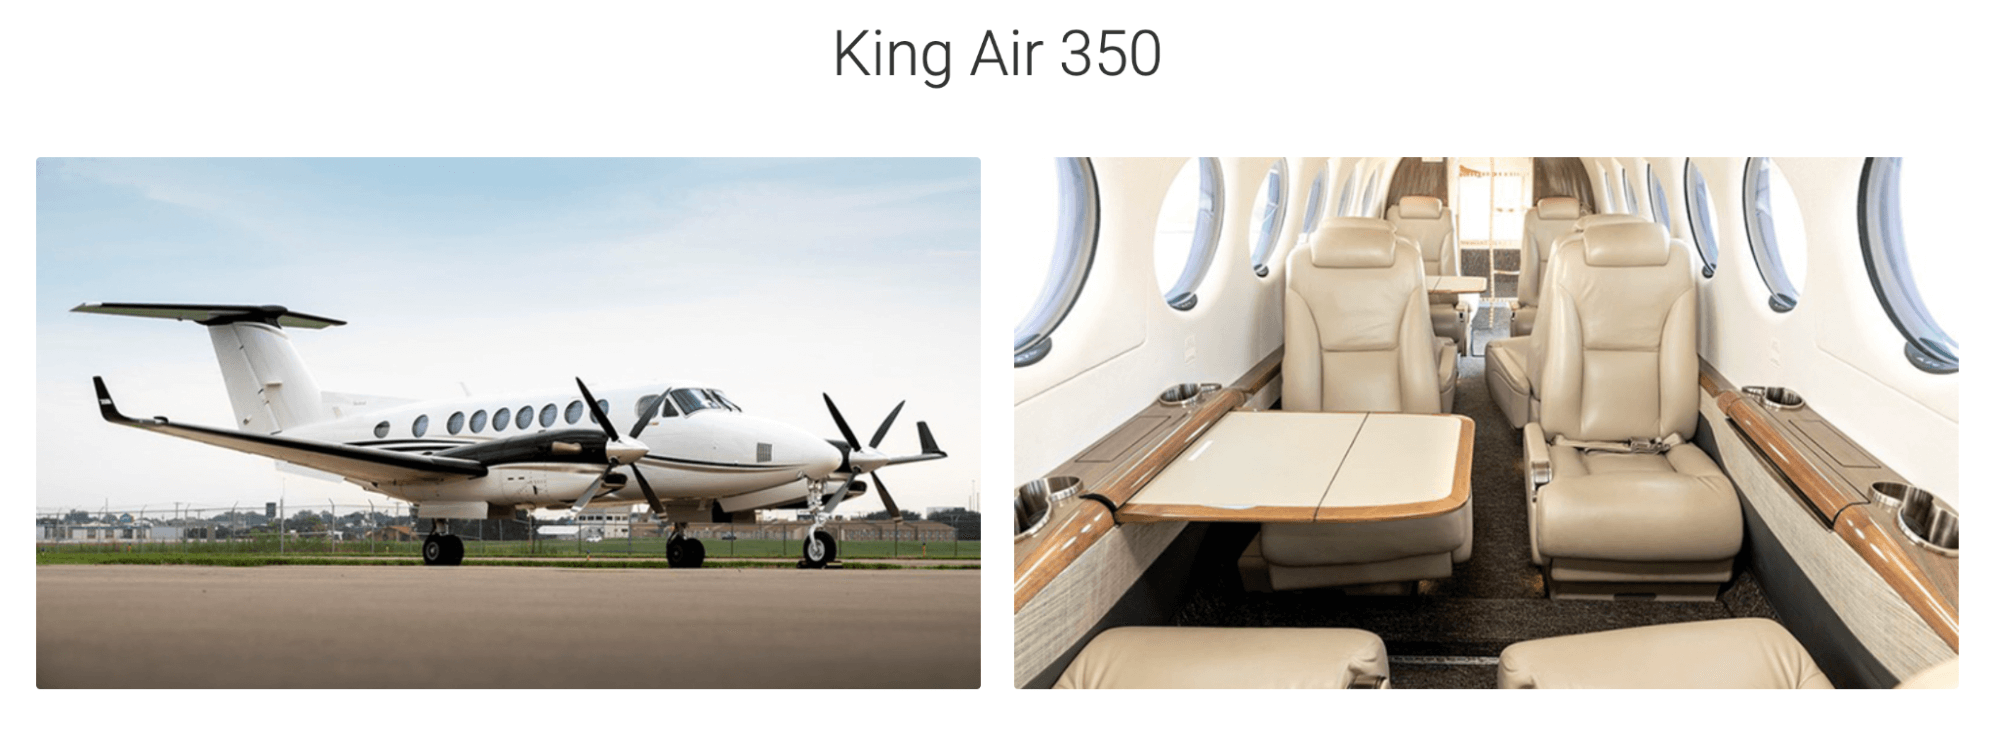 An exterior and interior picture of the turboprop jet King Air 350.